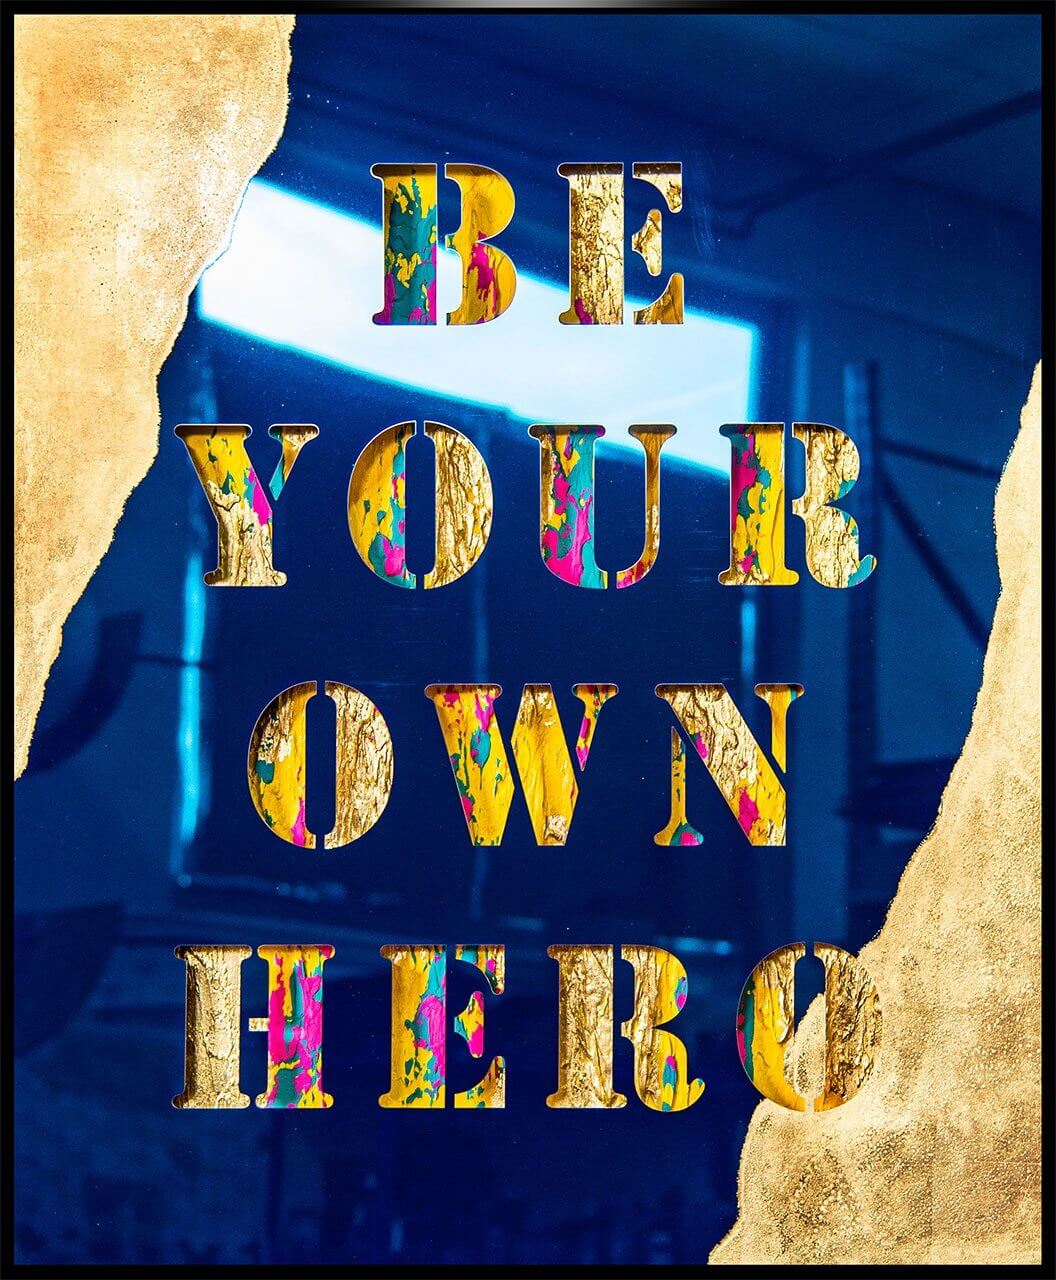 Devin Miles: Be Your Own Hero - Blue / Gold